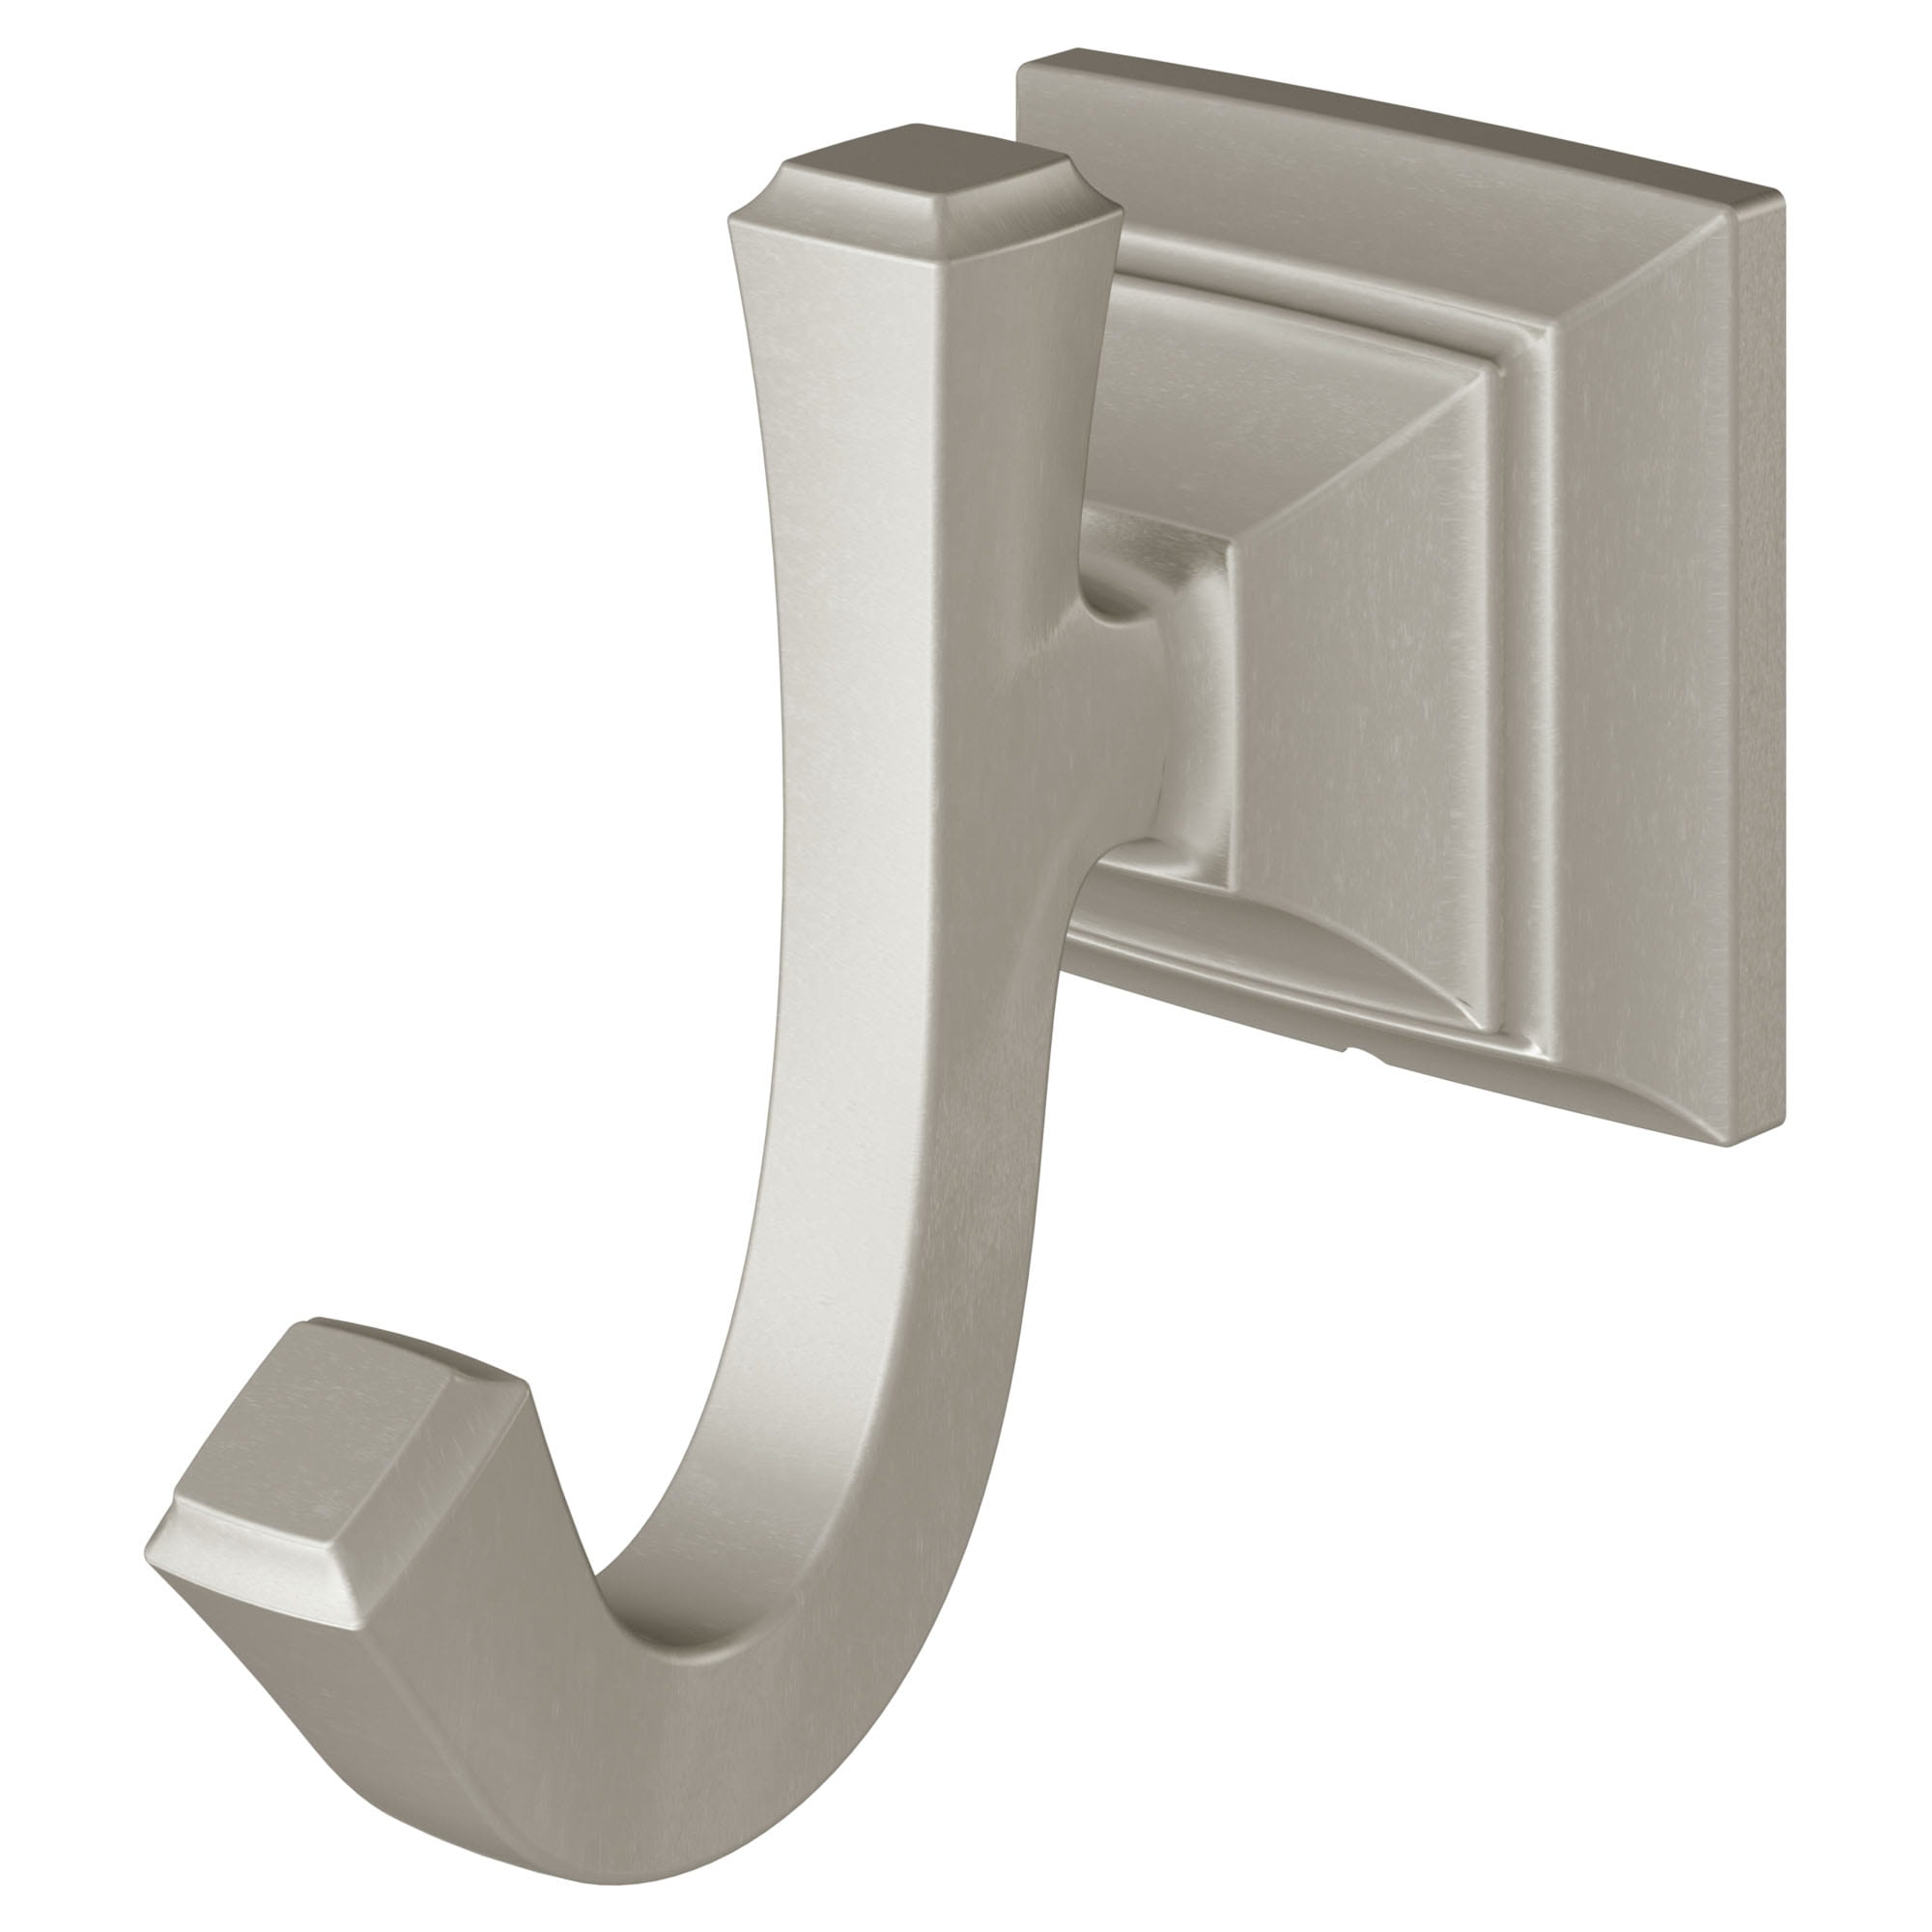 Town Square S Double Robe Hook   BRUSHED NICKEL